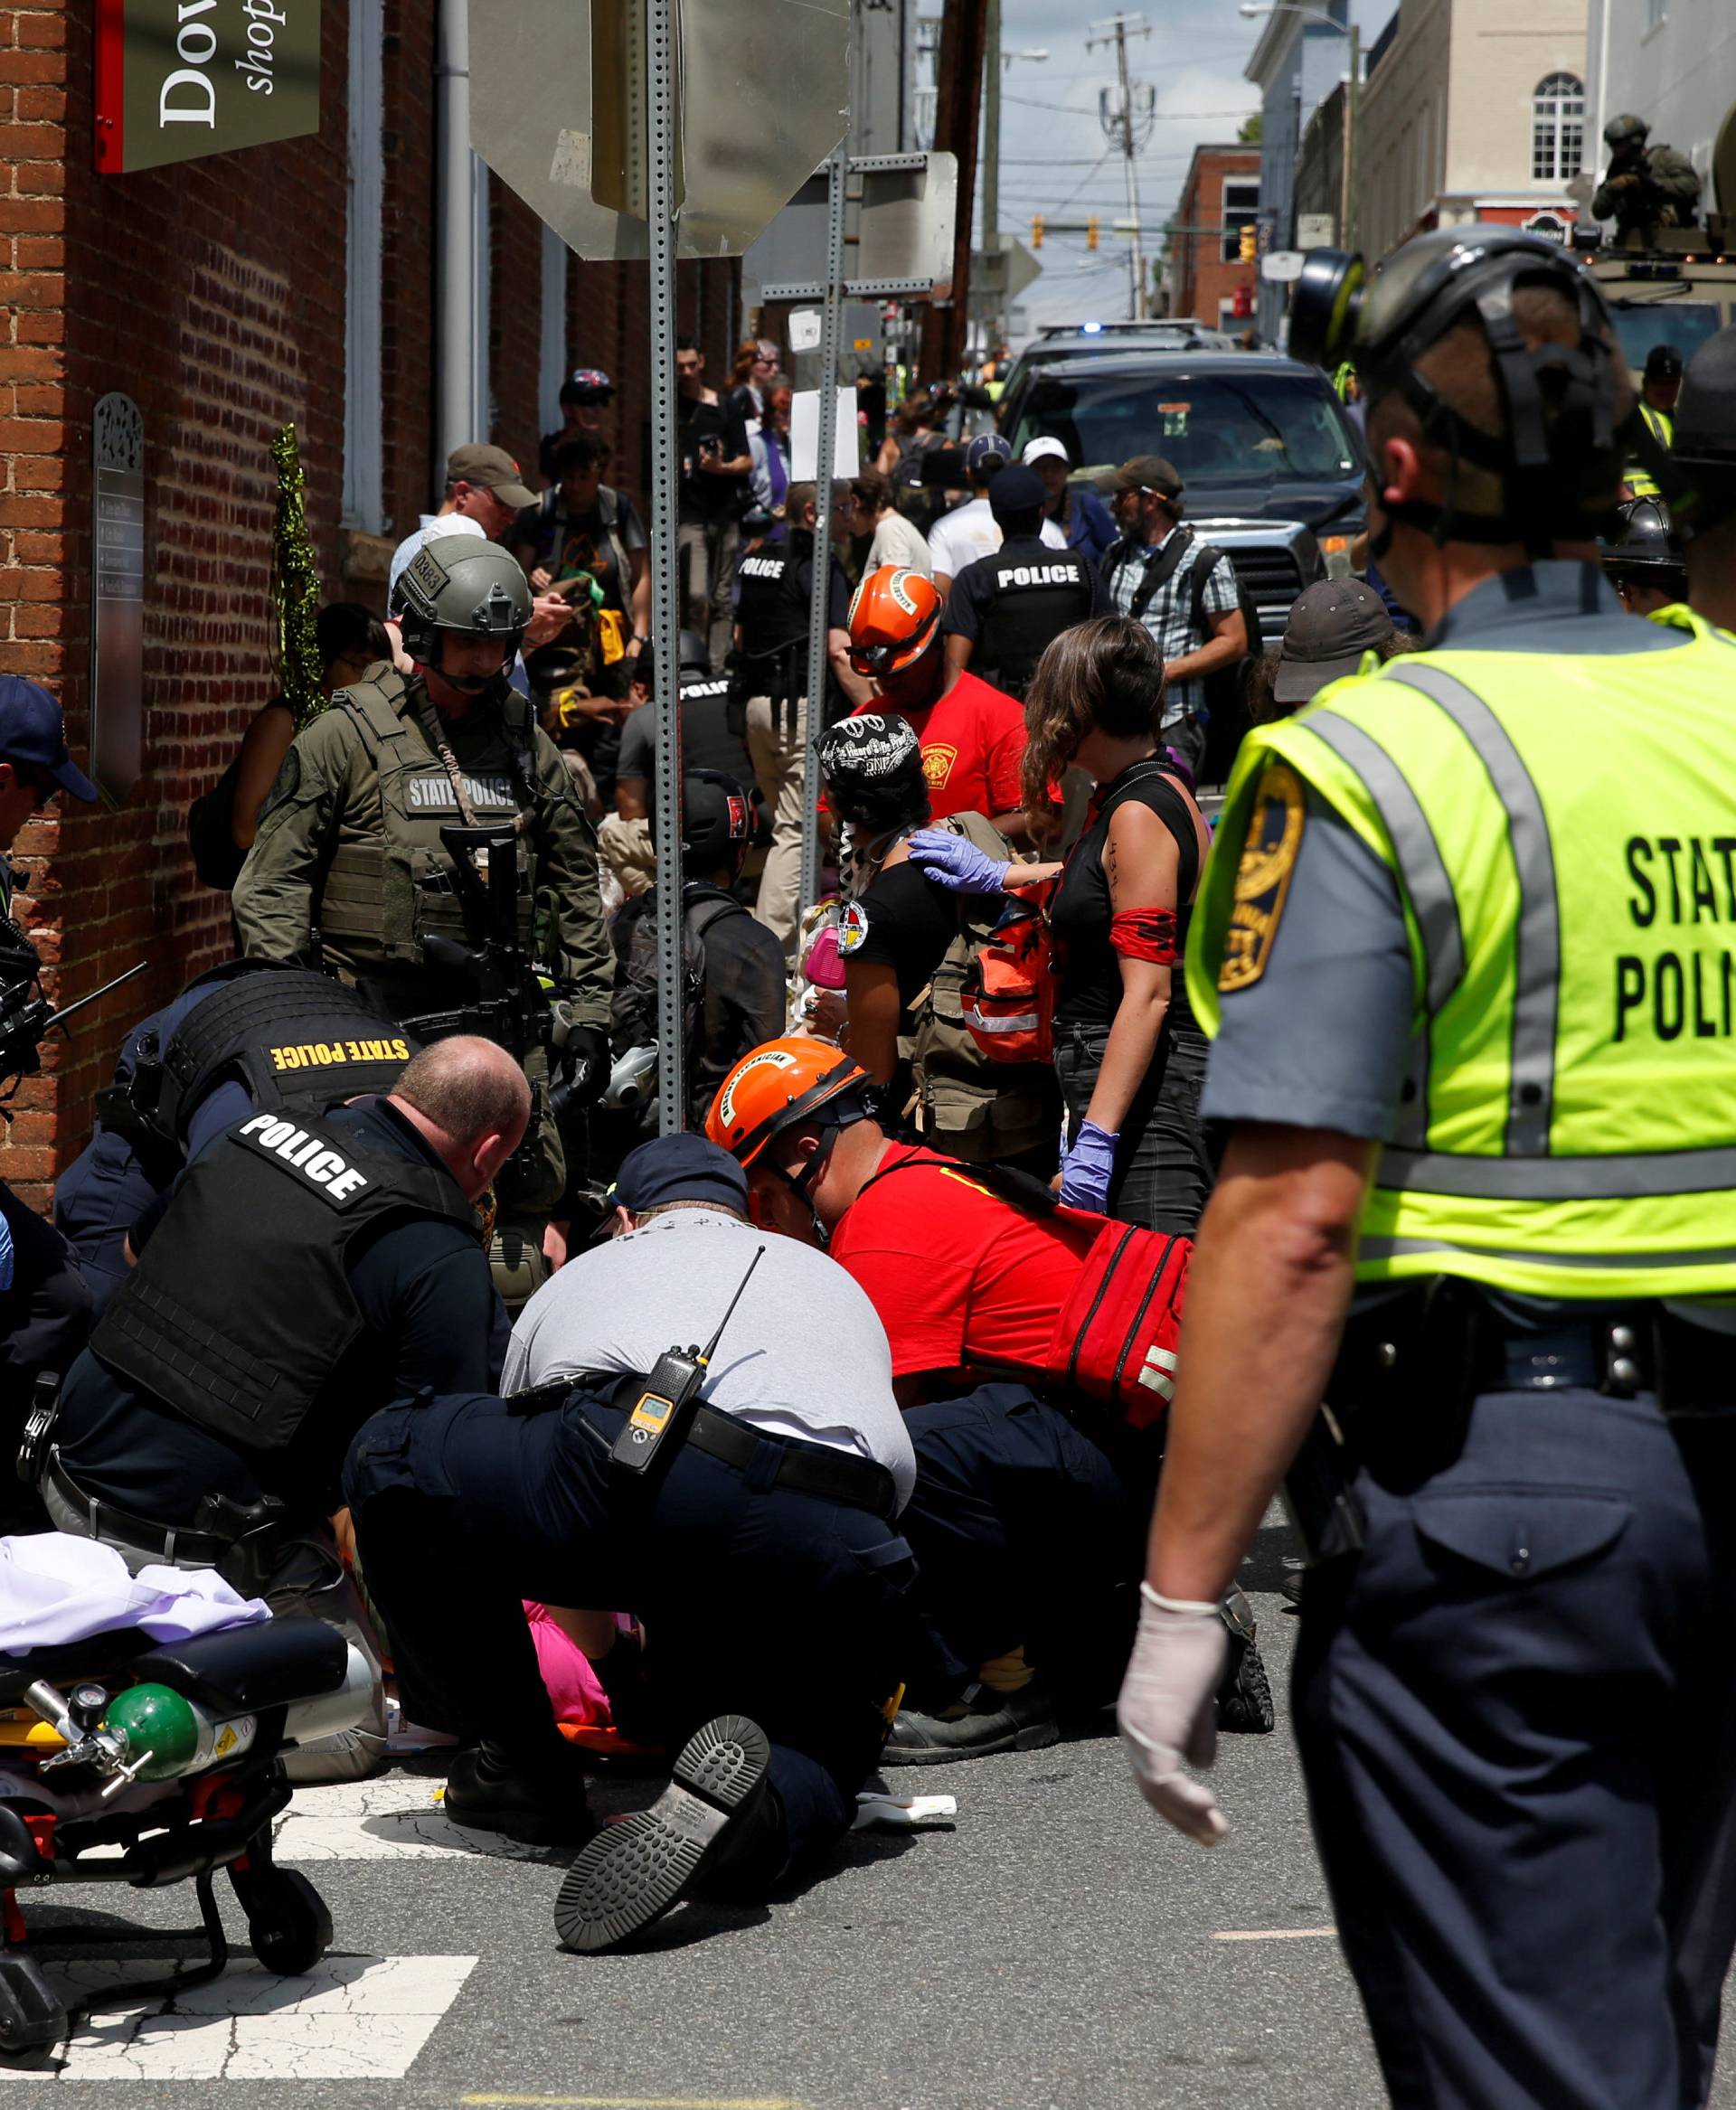 Rescue workers assist people who were injured when a car drove through a group of counter protestors at the "Unite the Right" rally in Charlottesville